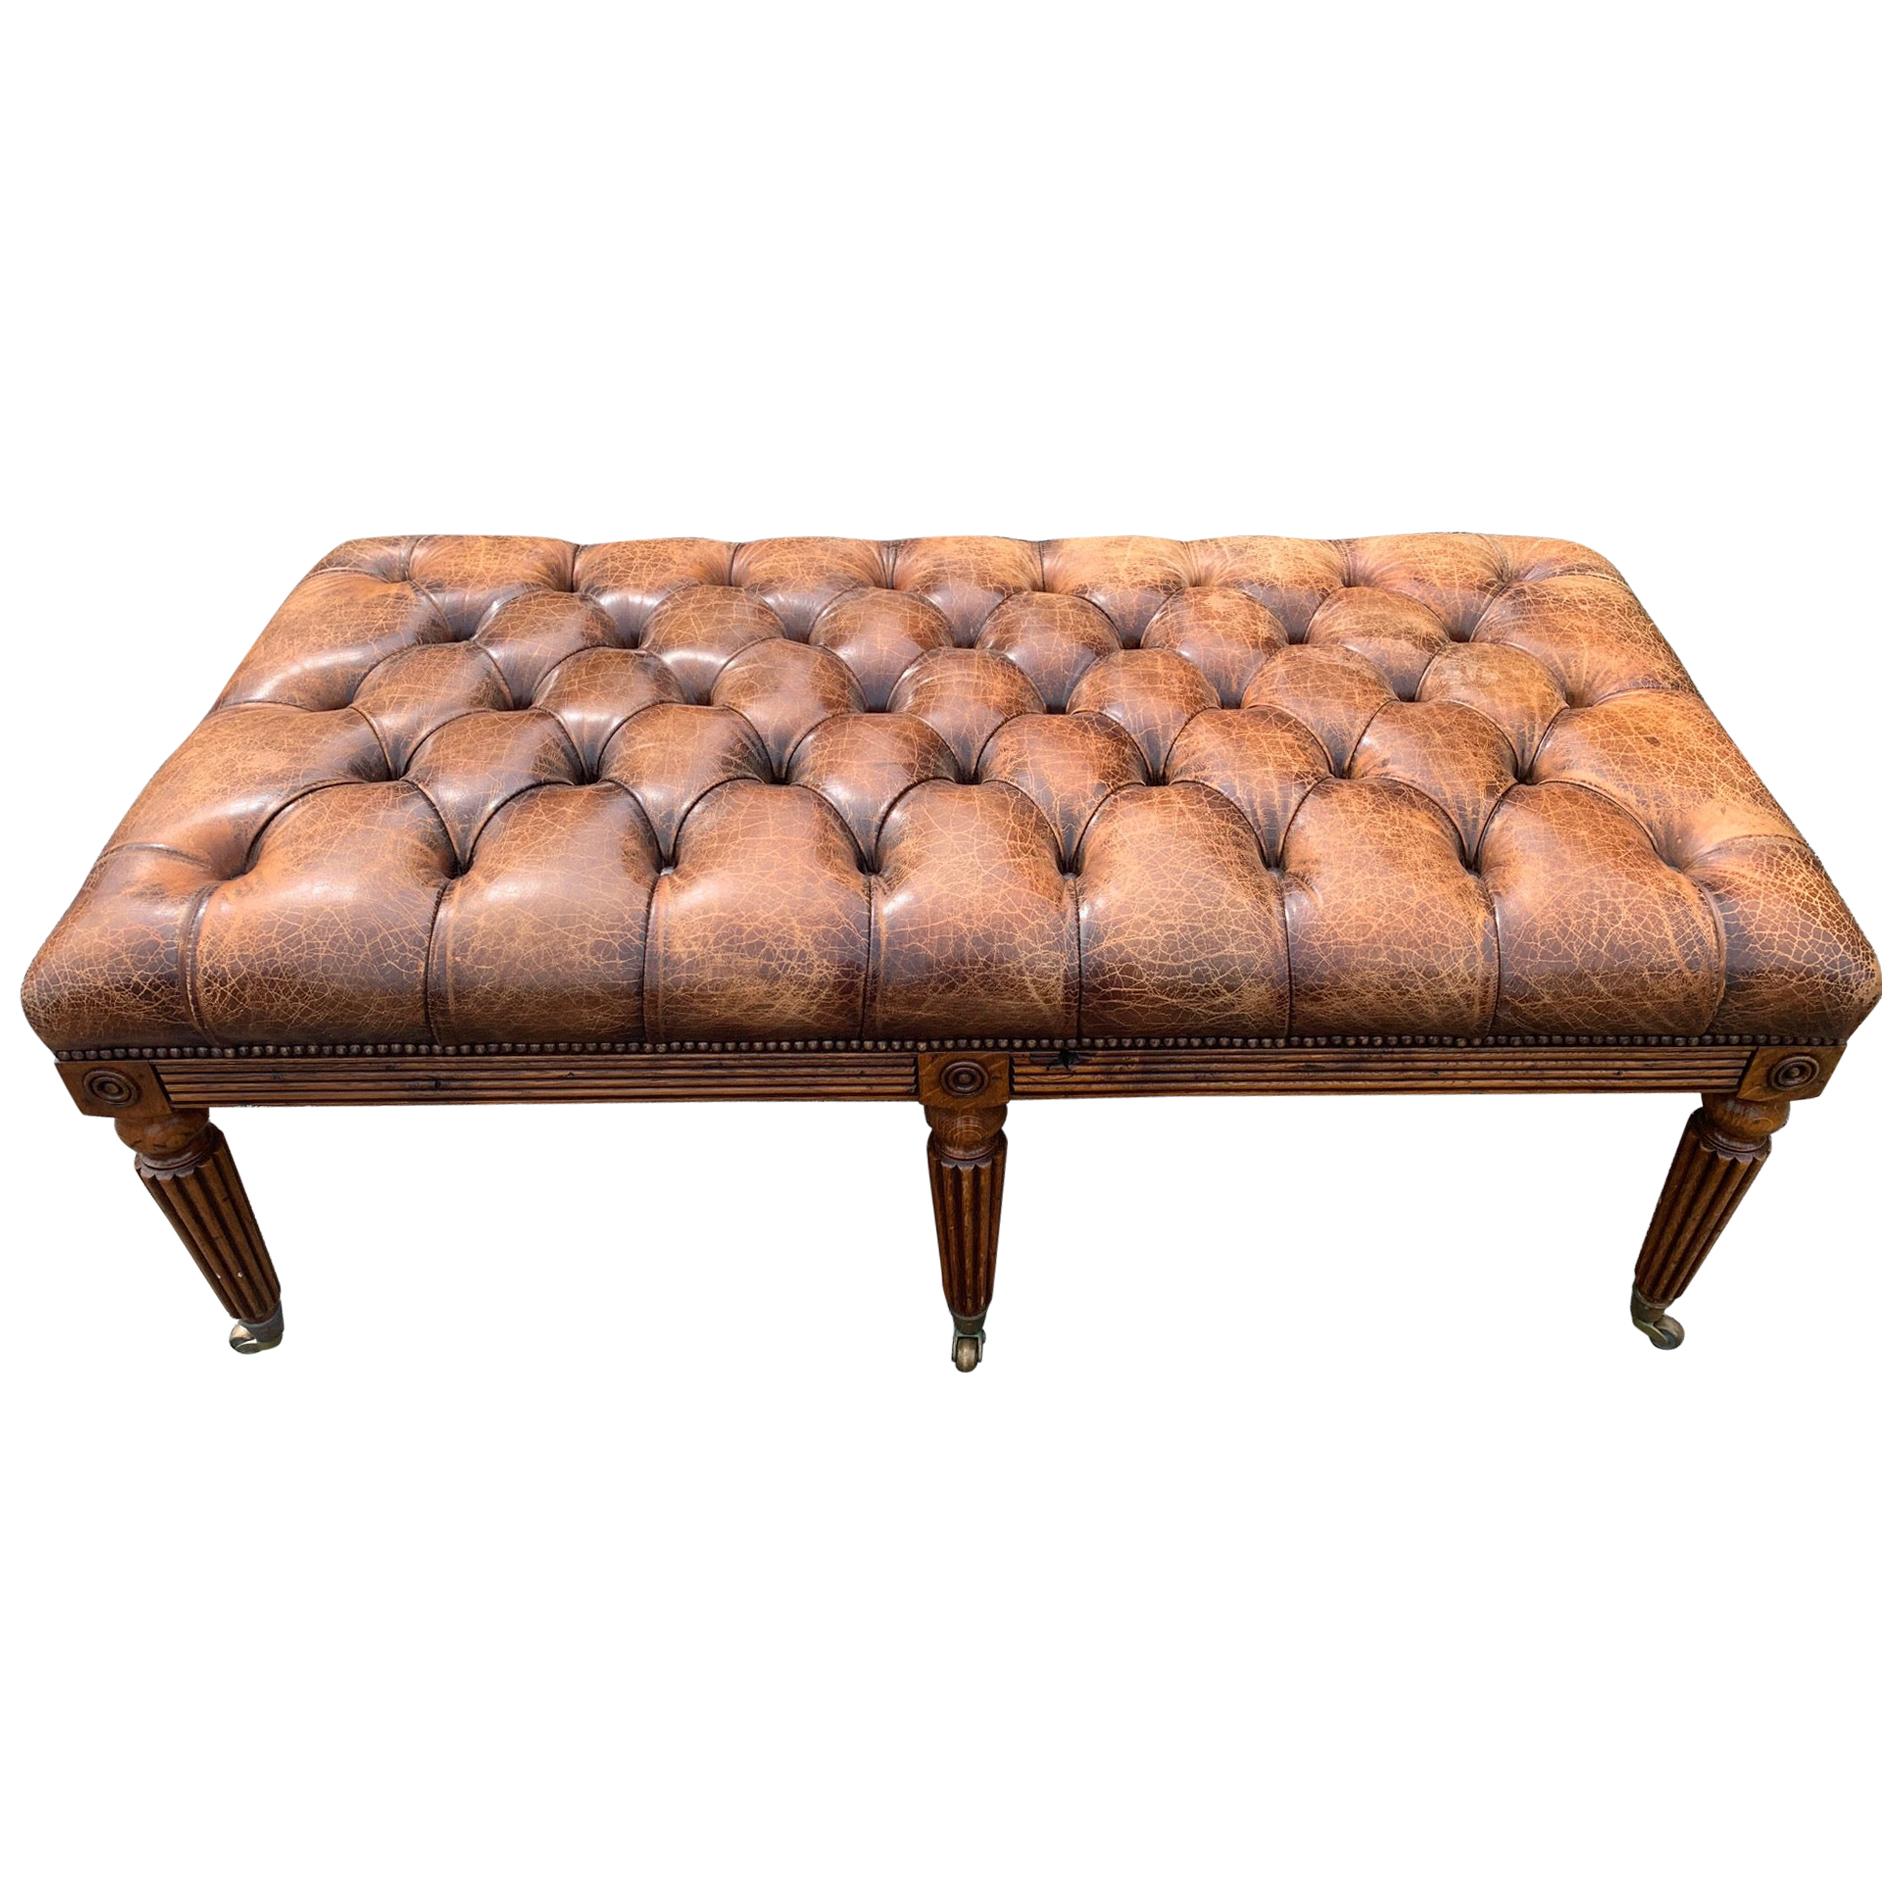 Sumptuous Large English 19th Century Leather Tufted Ottoman with Studs